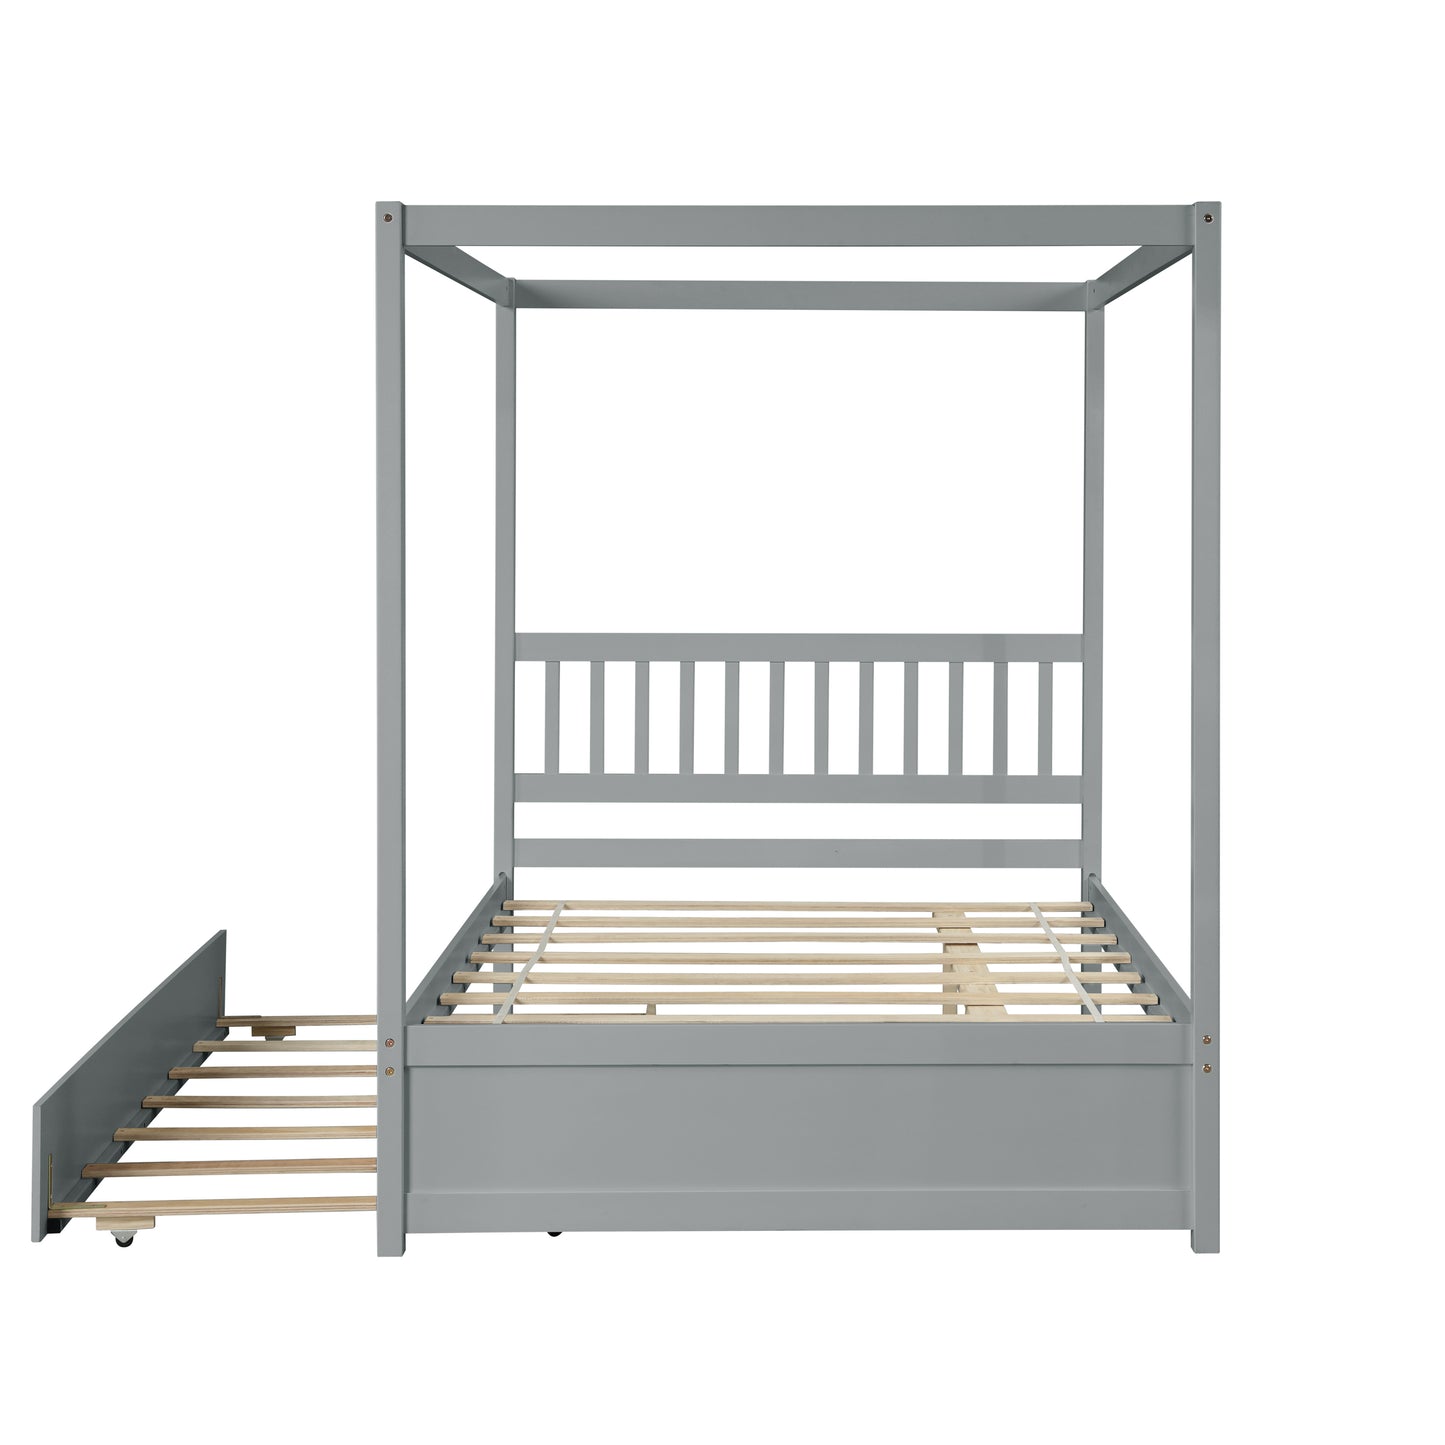 Full Size Canopy Bed with Twin Trundle, Kids Solid Wood Platform Bed Frame w/ Headboard, No Box Spring Needed Grey Color